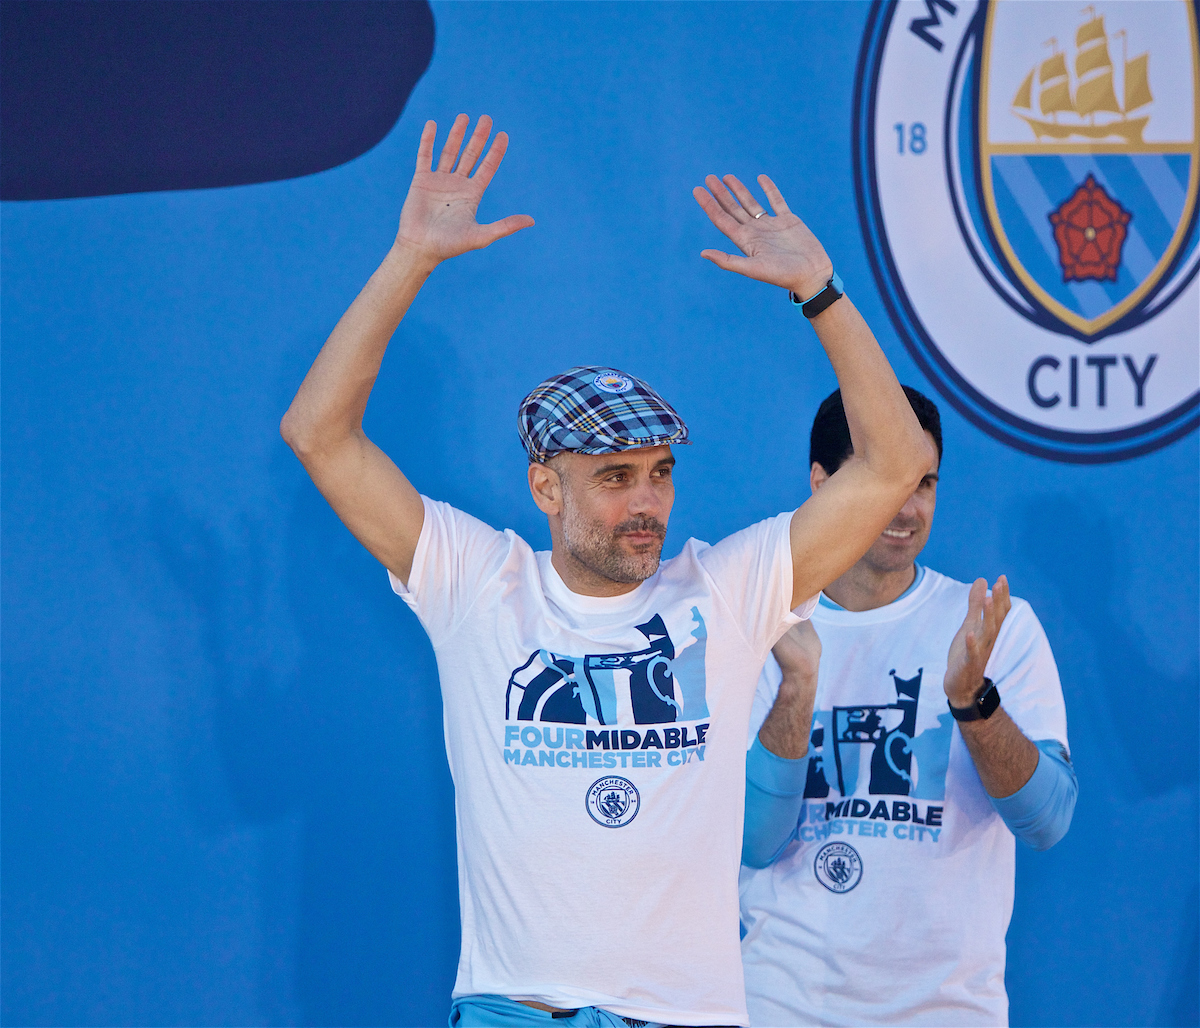 Manchester City's manager Pep Guardiola on stage after an open-top bus parade through the city after winning a domestic treble of FA Premier League, Football League Cup and FA Cup trophies